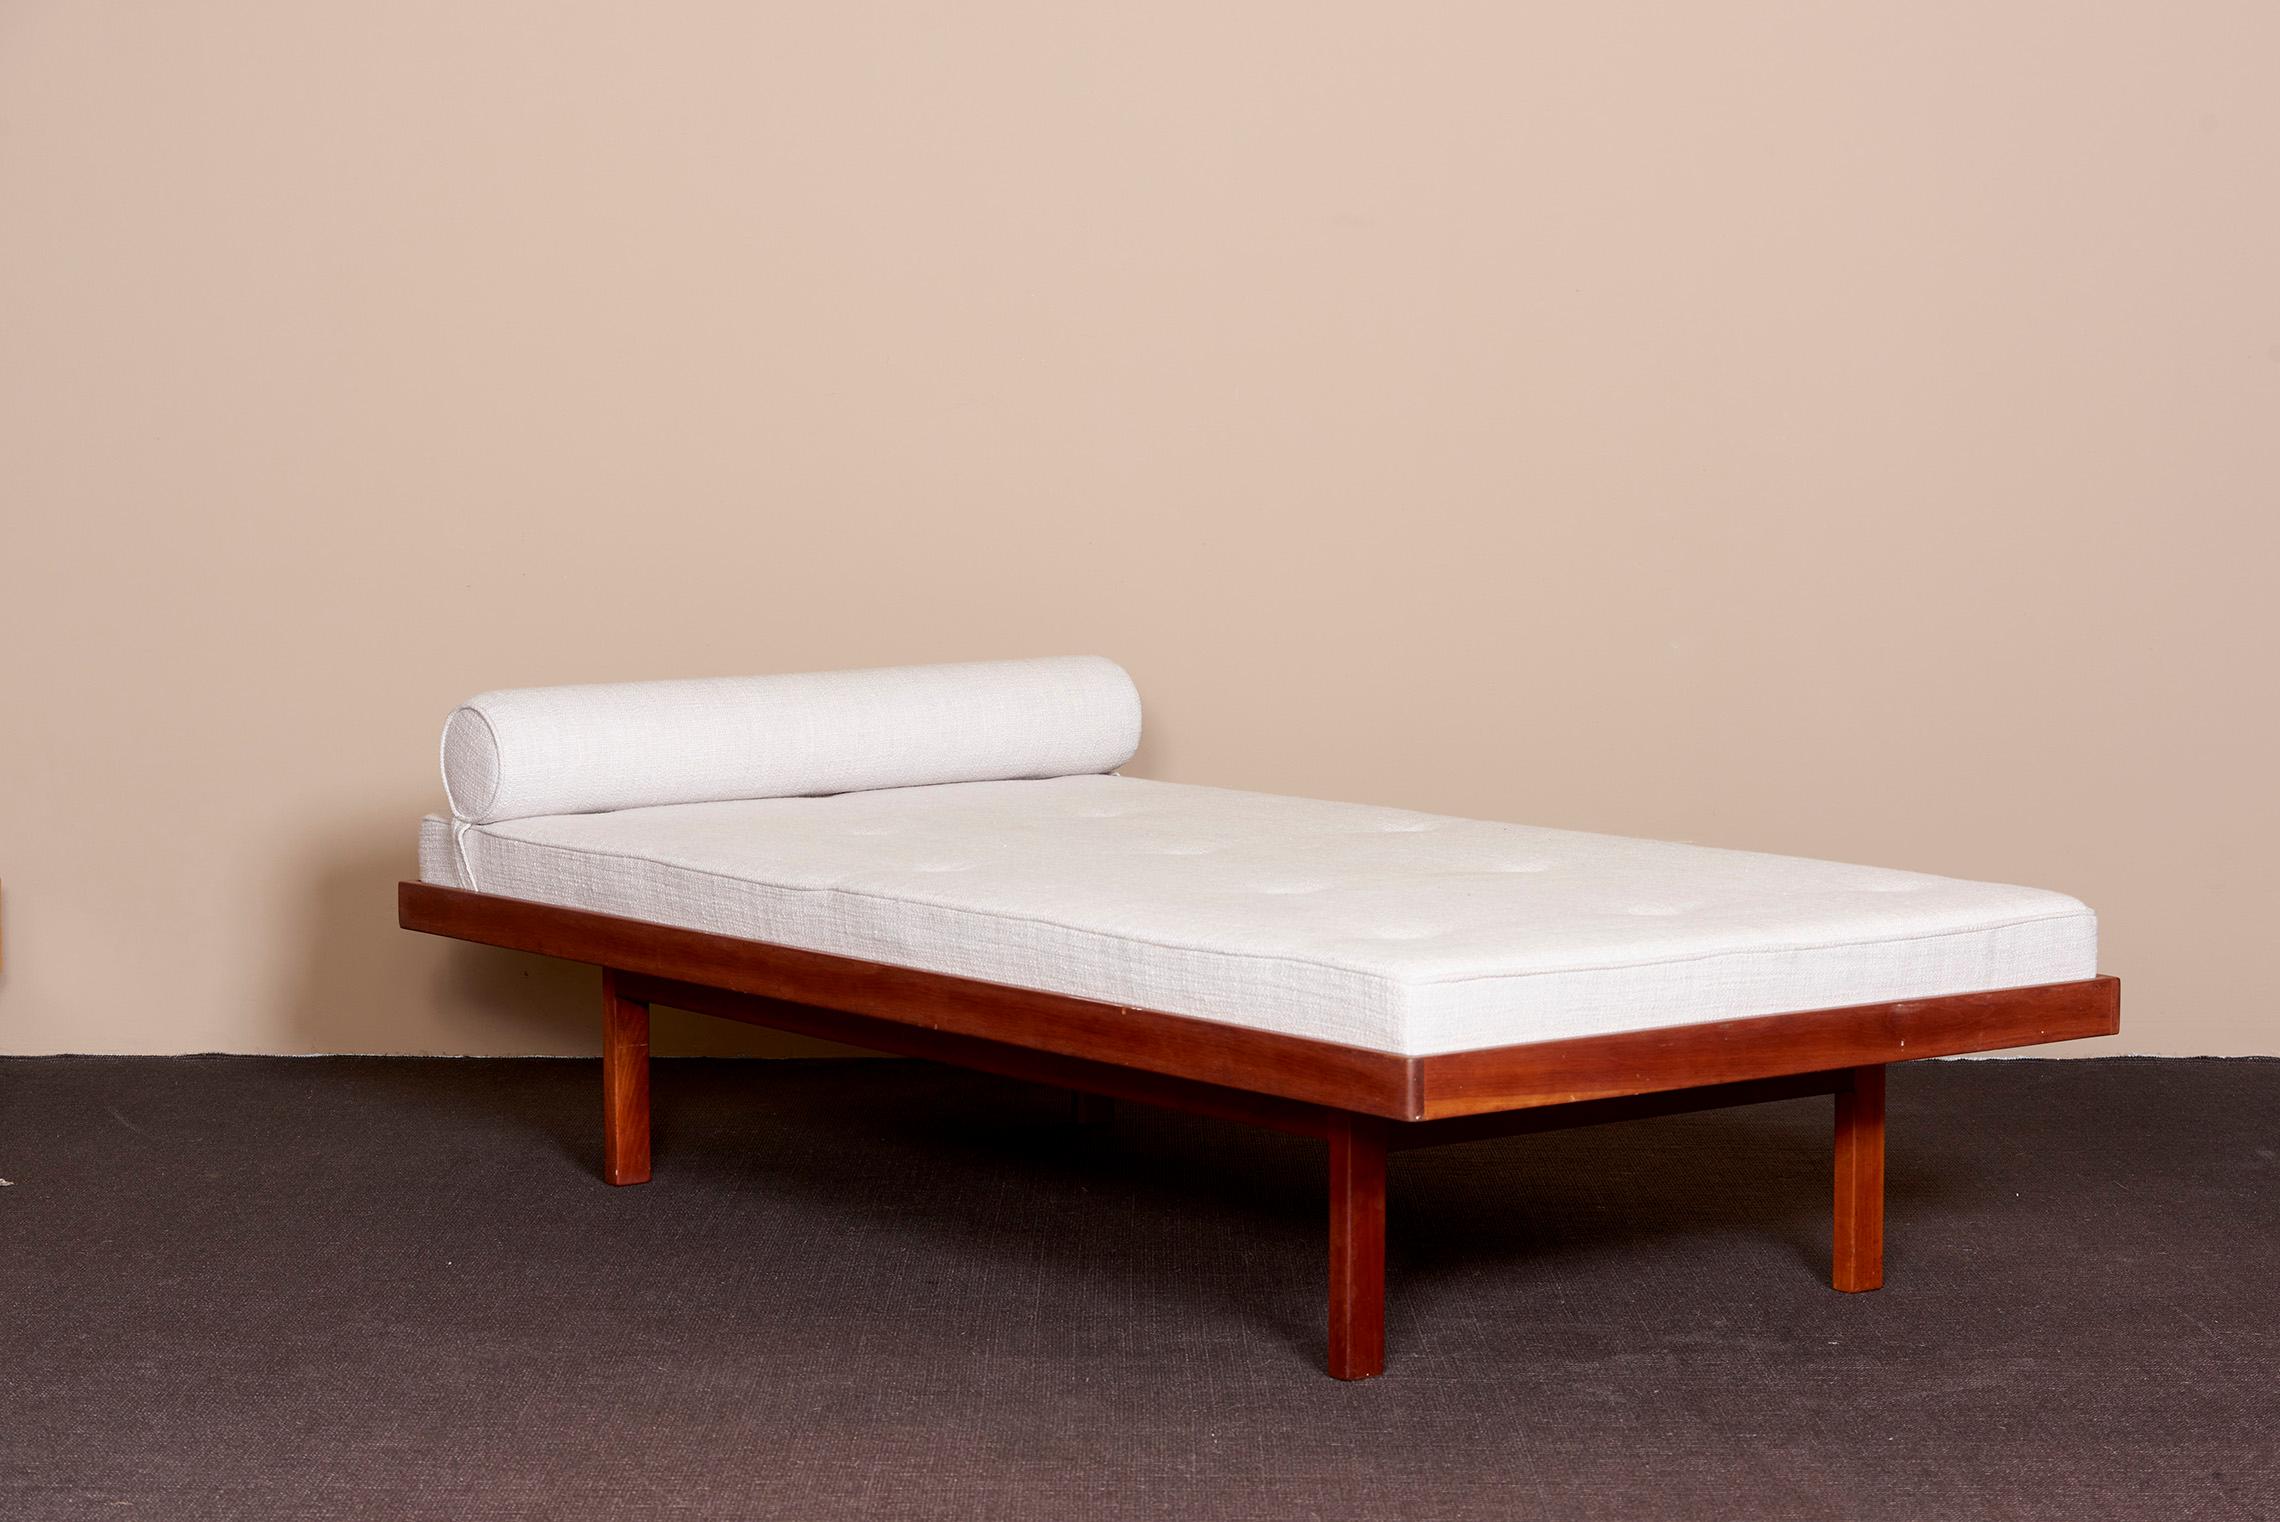 Mid-20th Century 1 of 2 American Studio Walnut Frame Daybeds in Mark Alexander Fabric, US 1960s For Sale